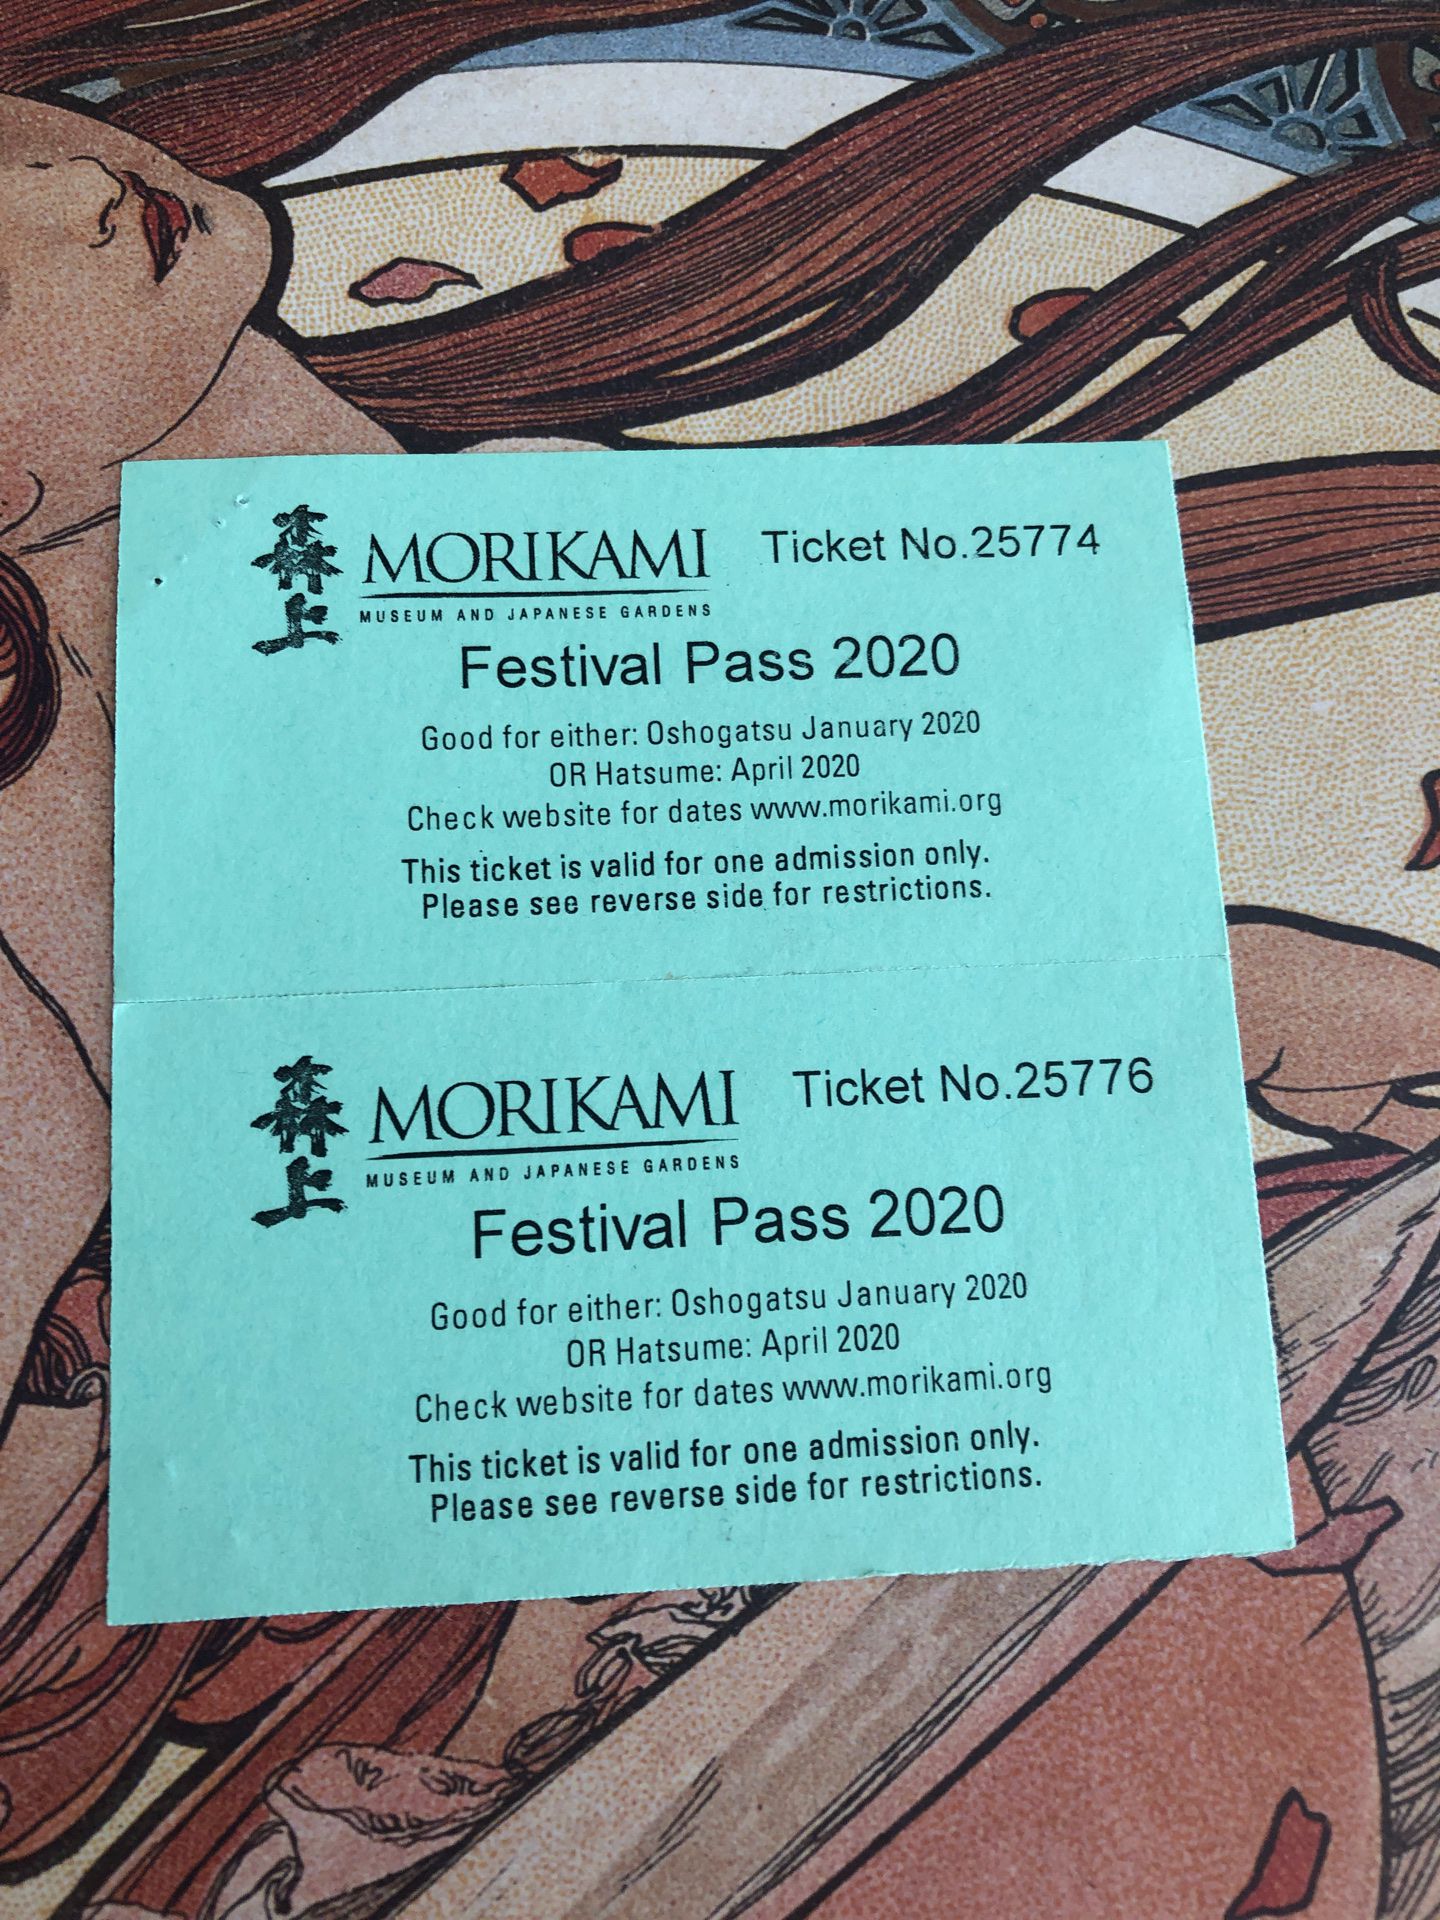 Morikami hatsume festival tickets x 2 - price $15 each - normally sold @ $20 At the door